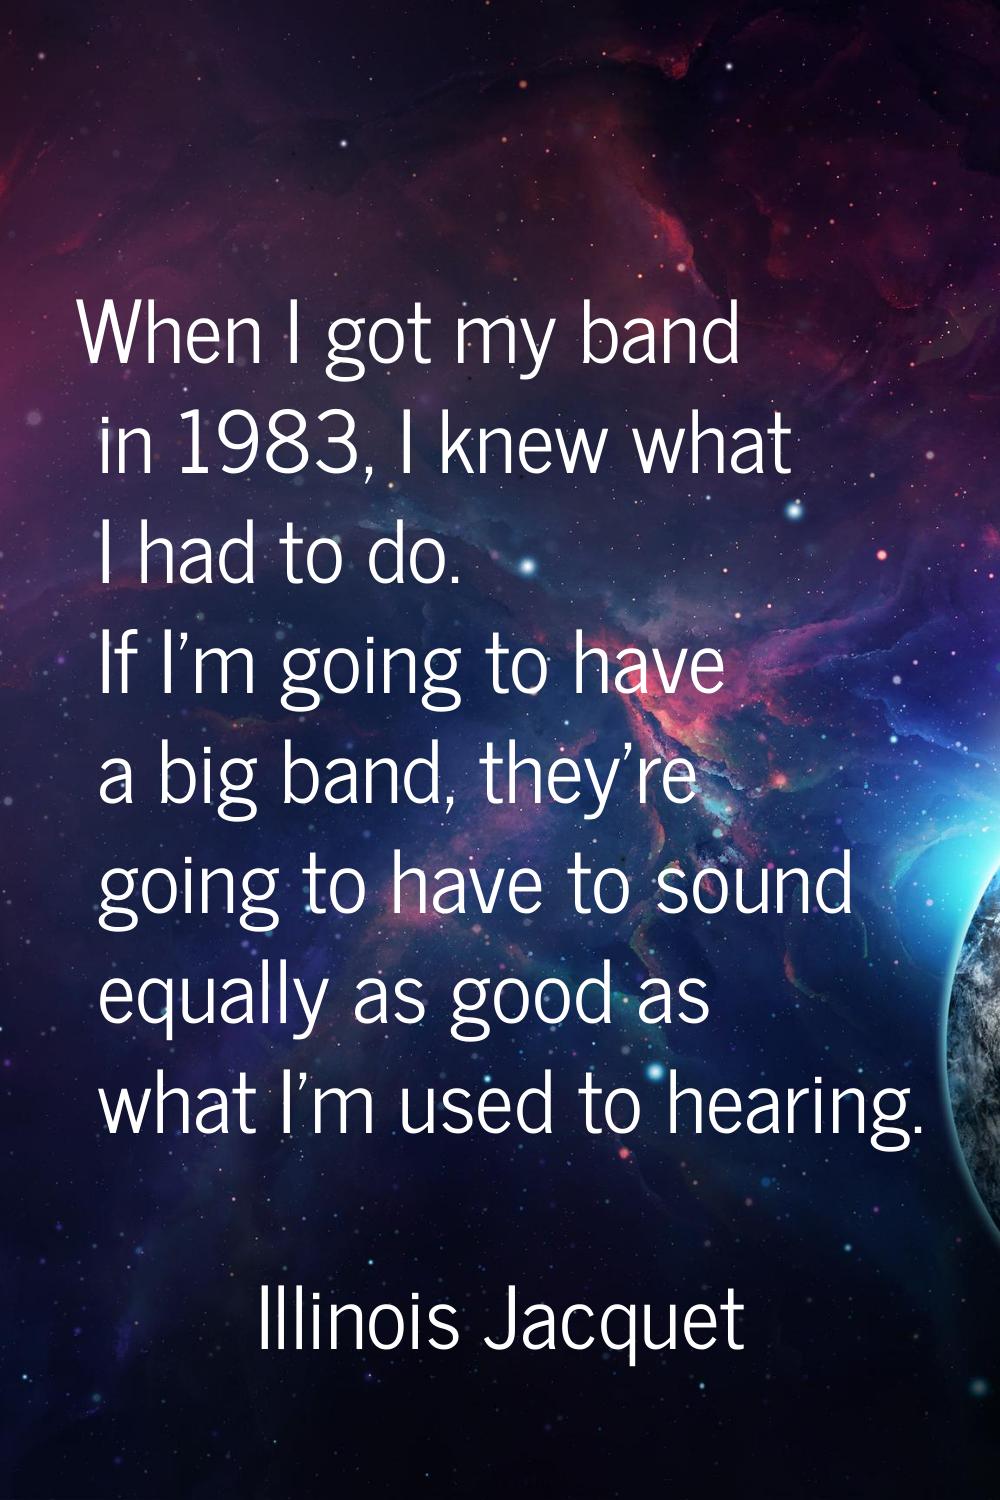 When I got my band in 1983, I knew what I had to do. If I'm going to have a big band, they're going